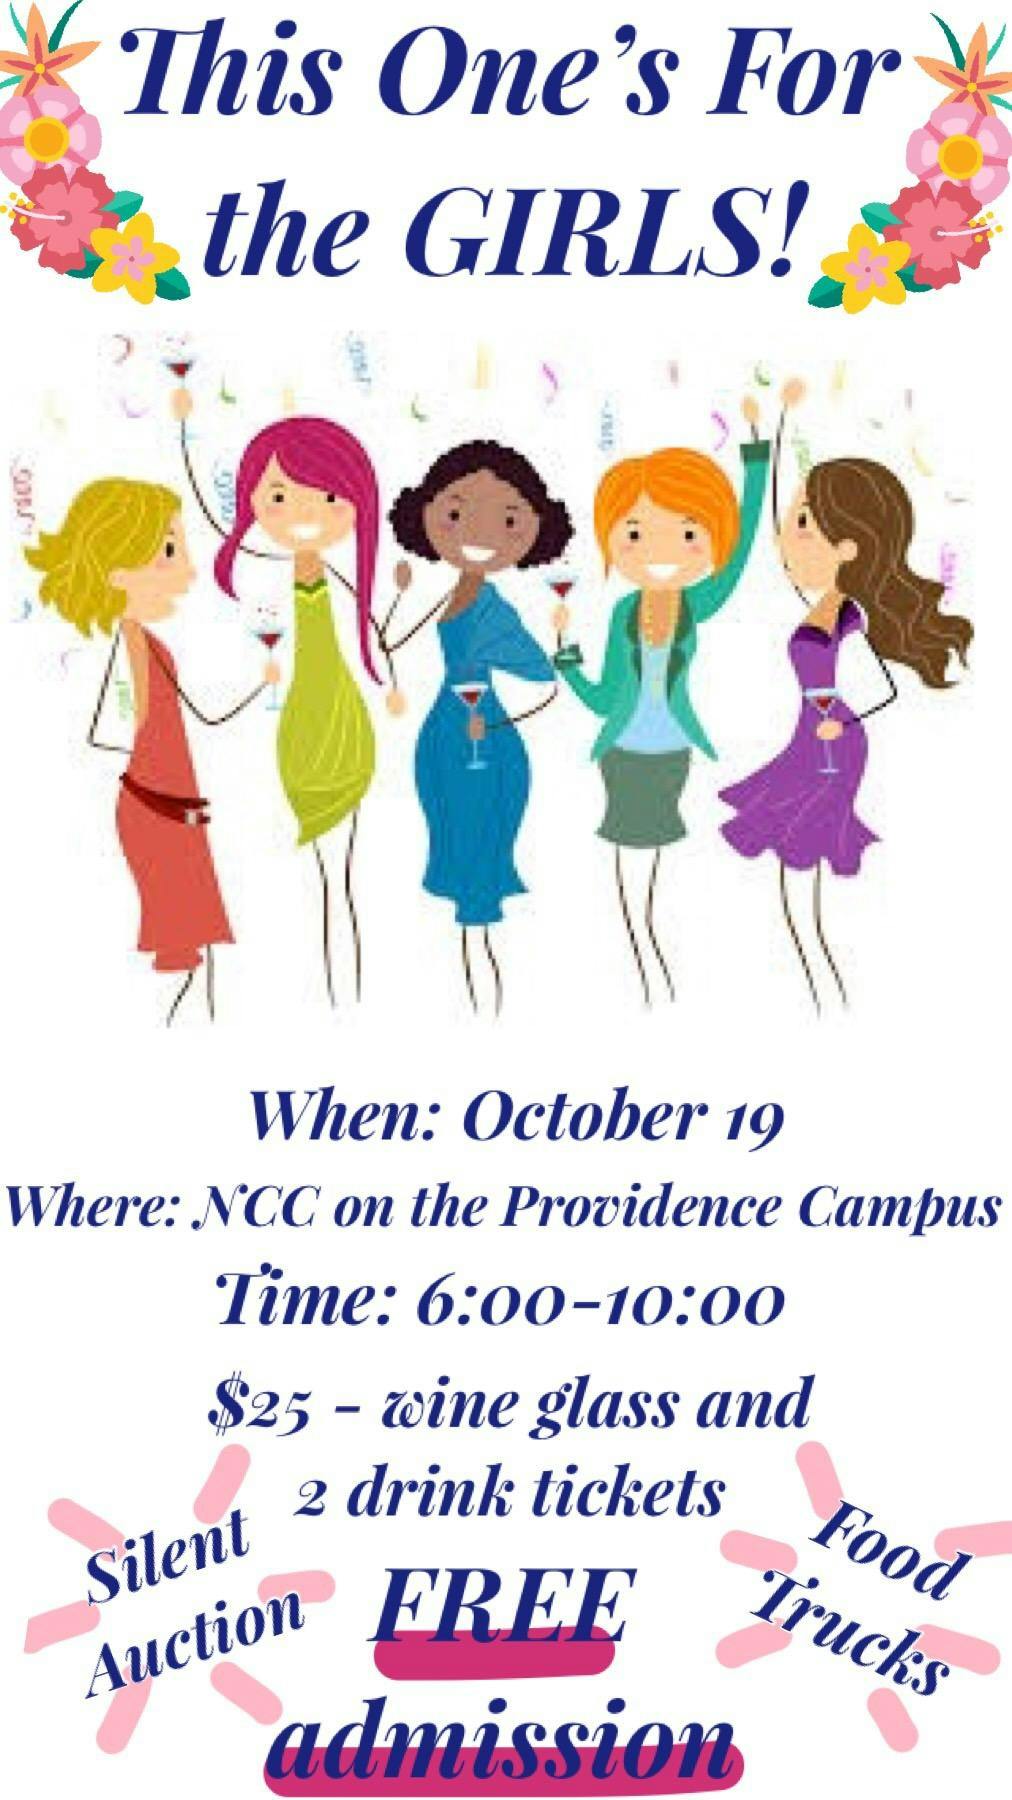 This One's for the Girls Event - Alumnae, Parents & Friends of Providence Invited!